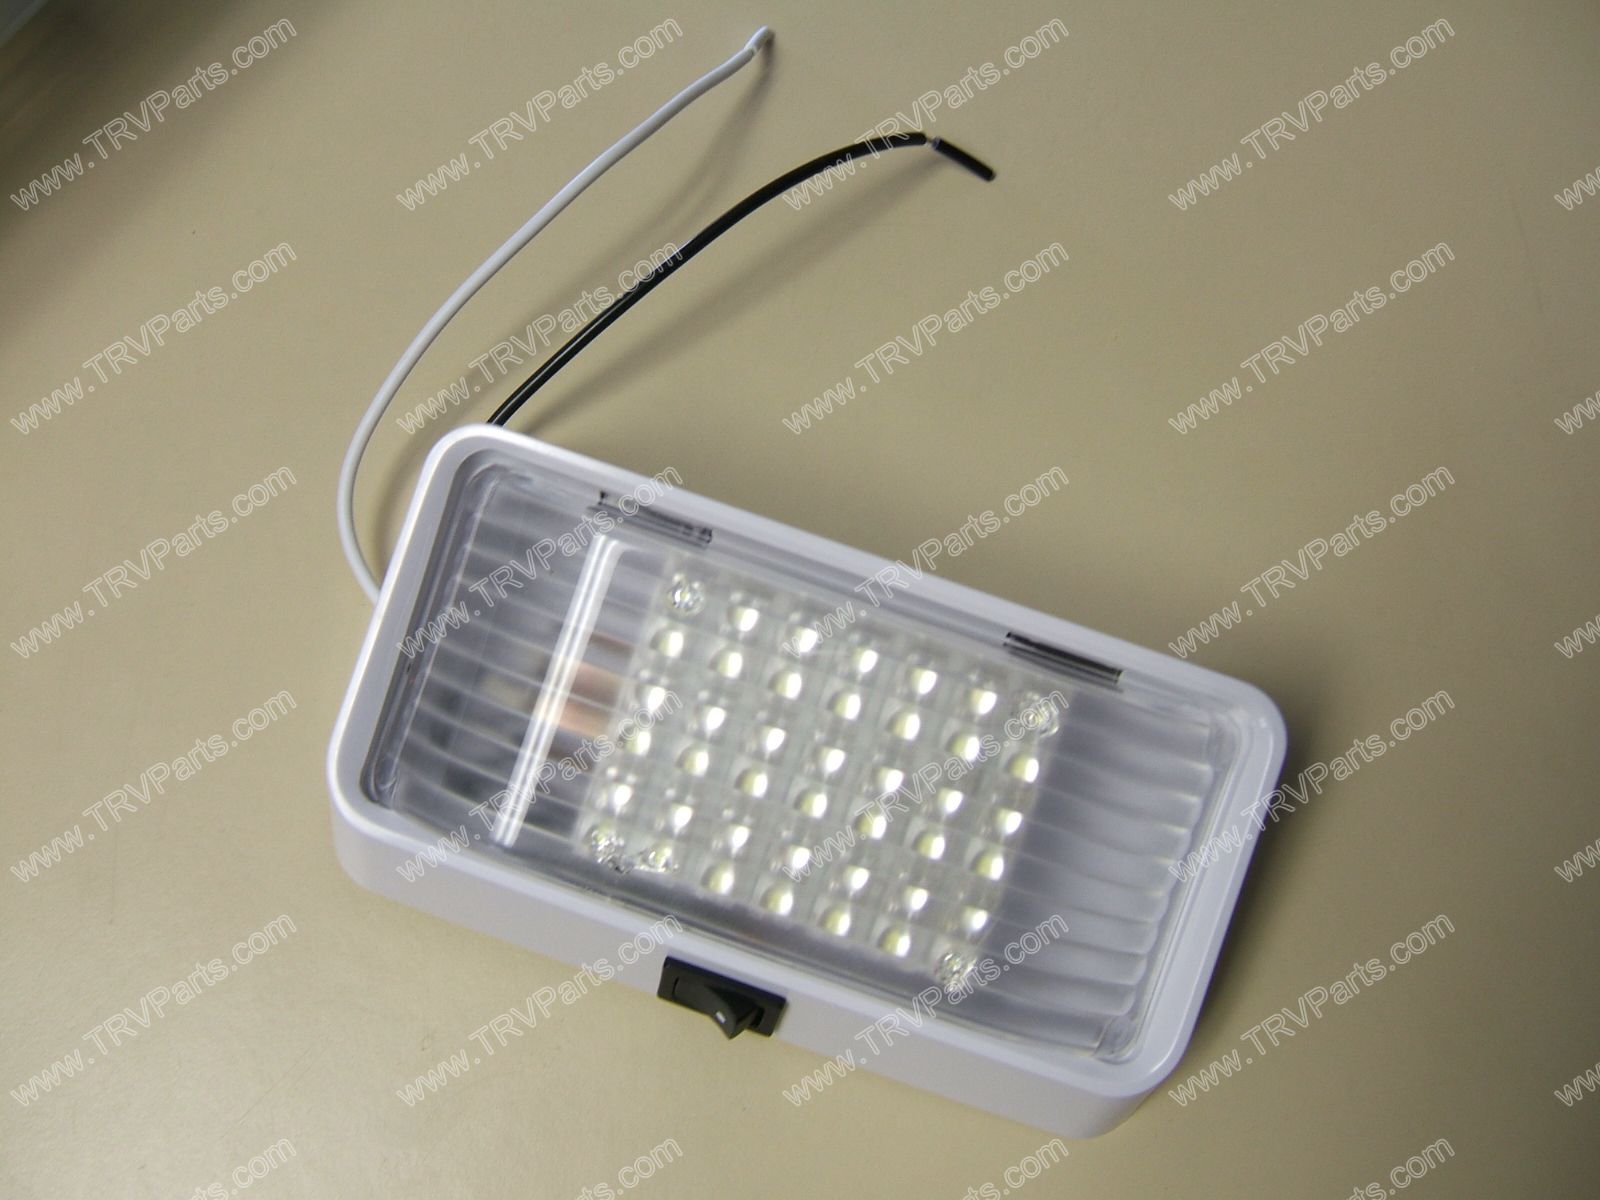 Patio Light 6 by 3.25 in Bright White with switch SKU256